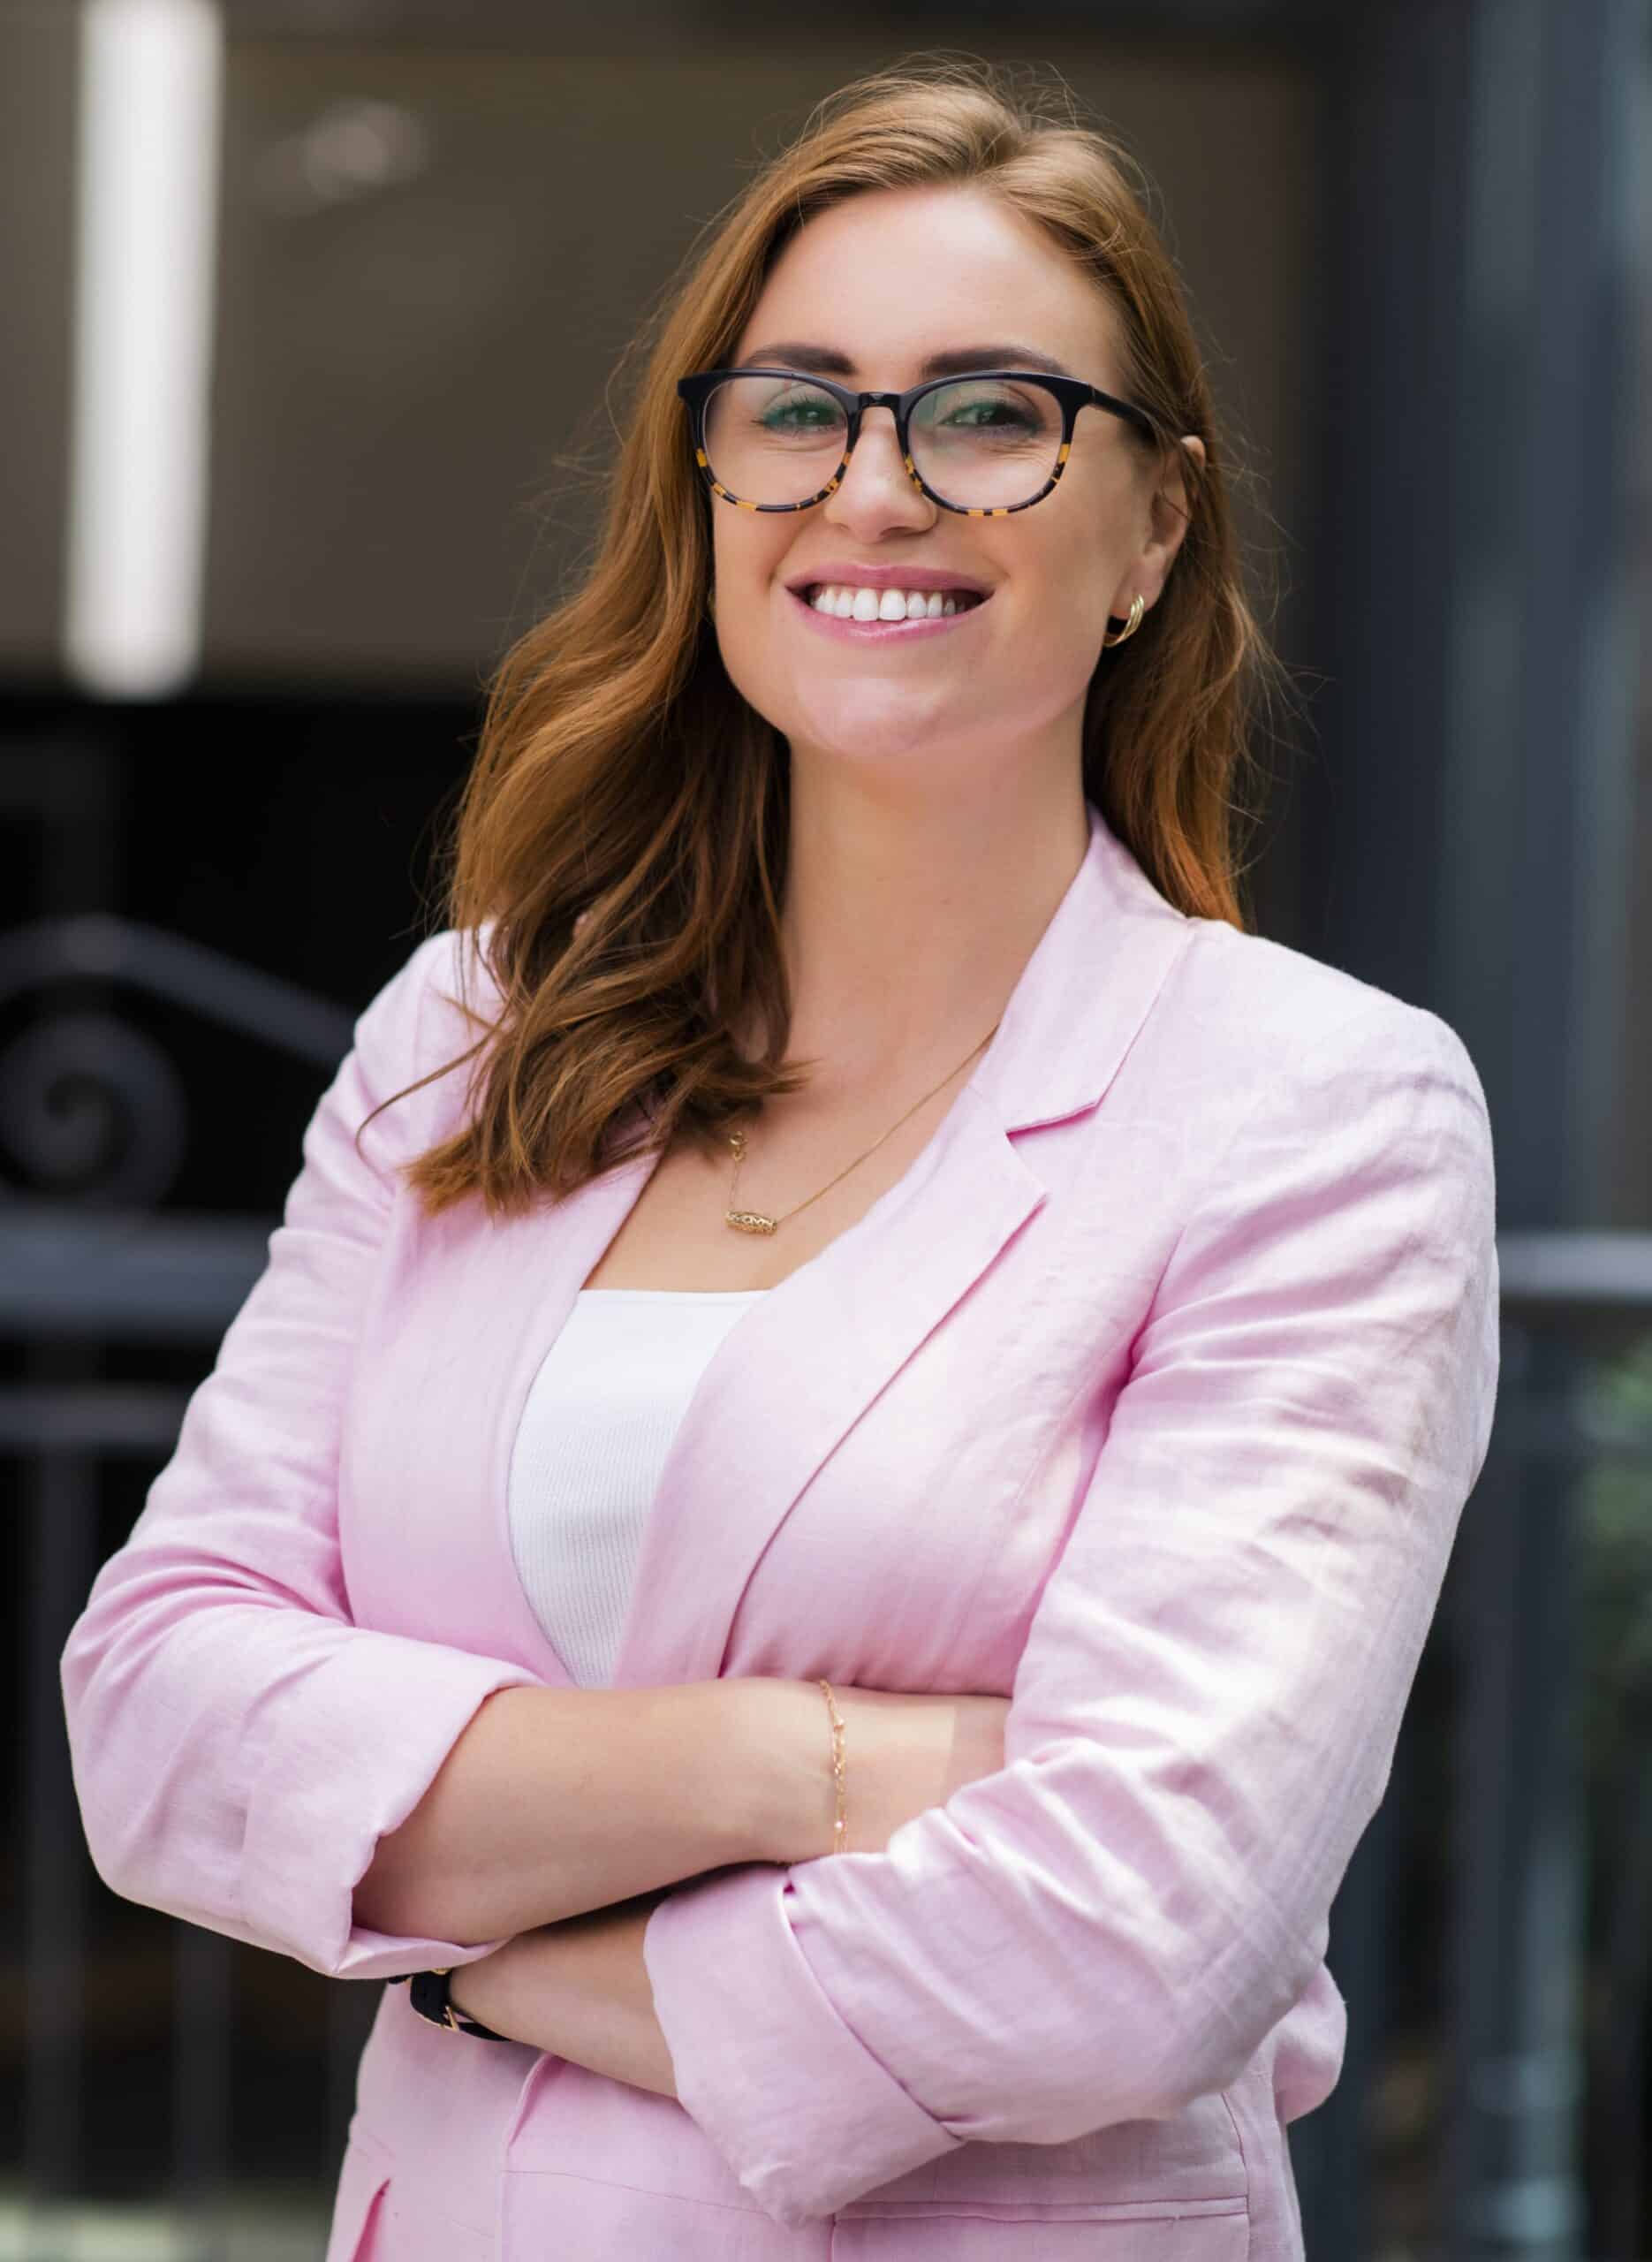 A woman, elegantly dressed in a pink suit and glasses, captured in a professional headshot photograph